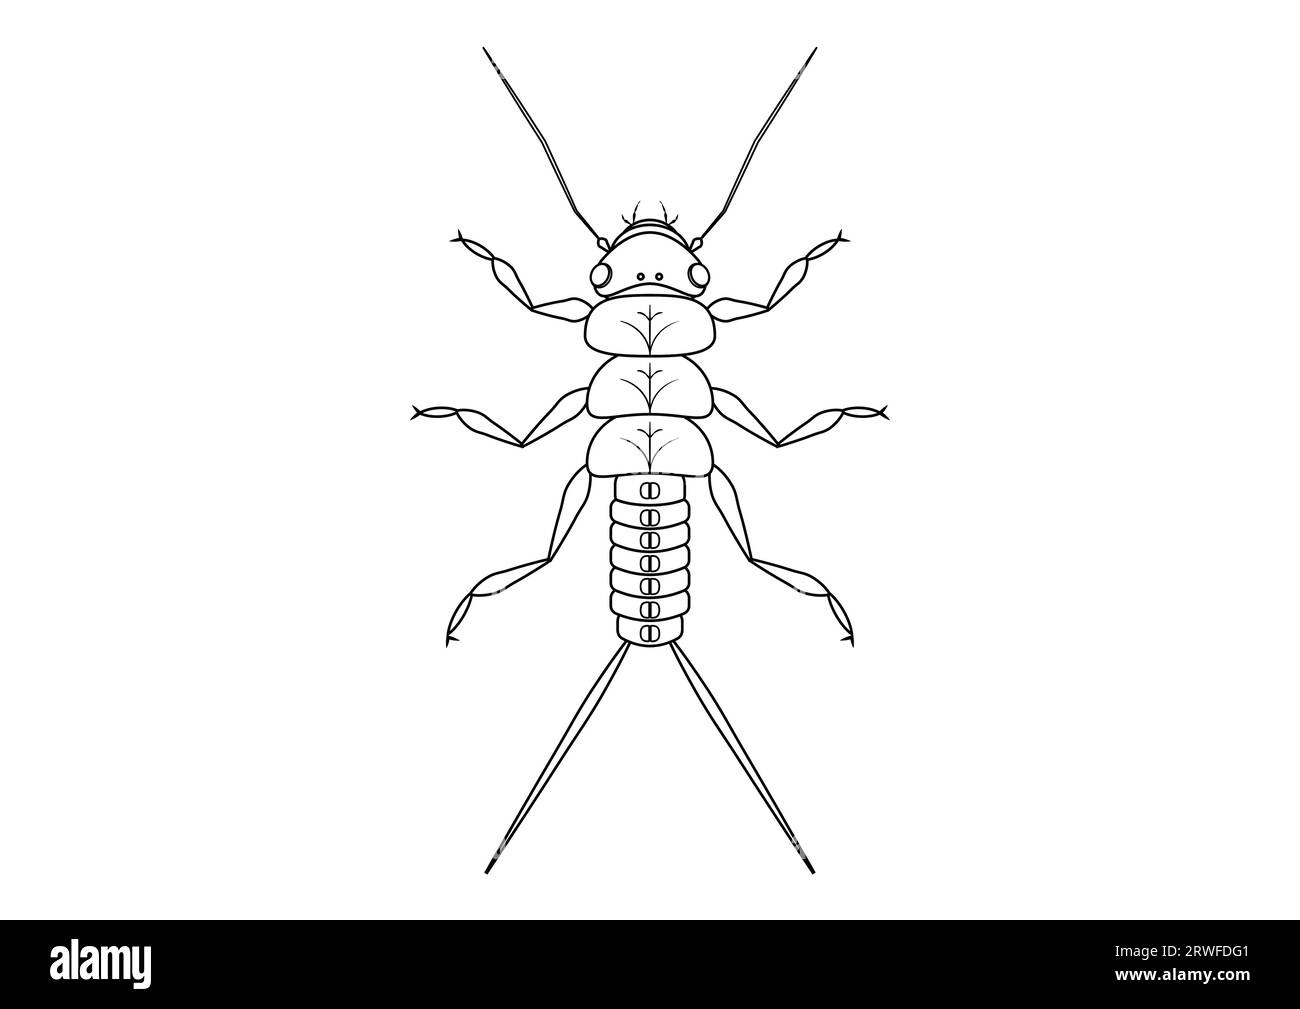 Black and White Stonefly Nymph Insect Clipart Vector isolated on White Background. Coloring Page of a Stonefly Nymph Insect Stock Vector